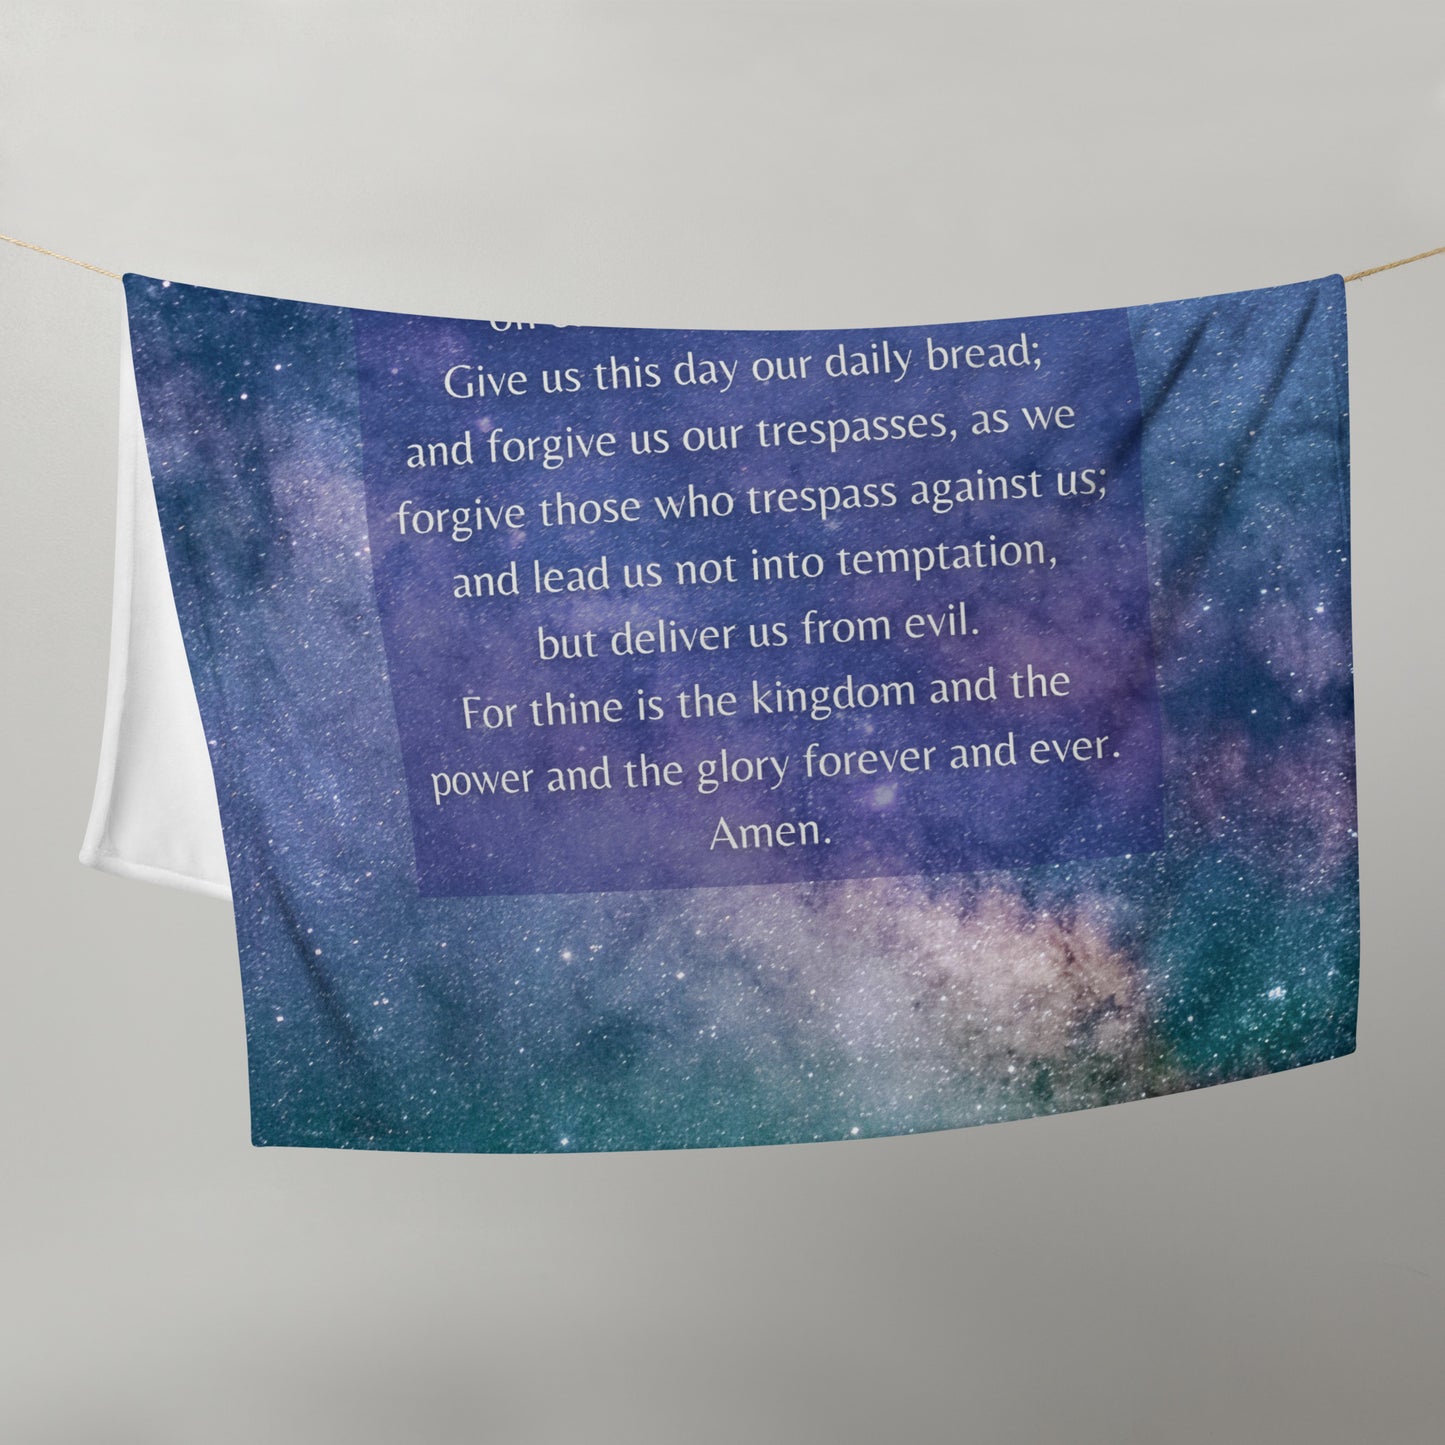 The lower half of a blue blanket with stars and part of the Lord's Prayer.